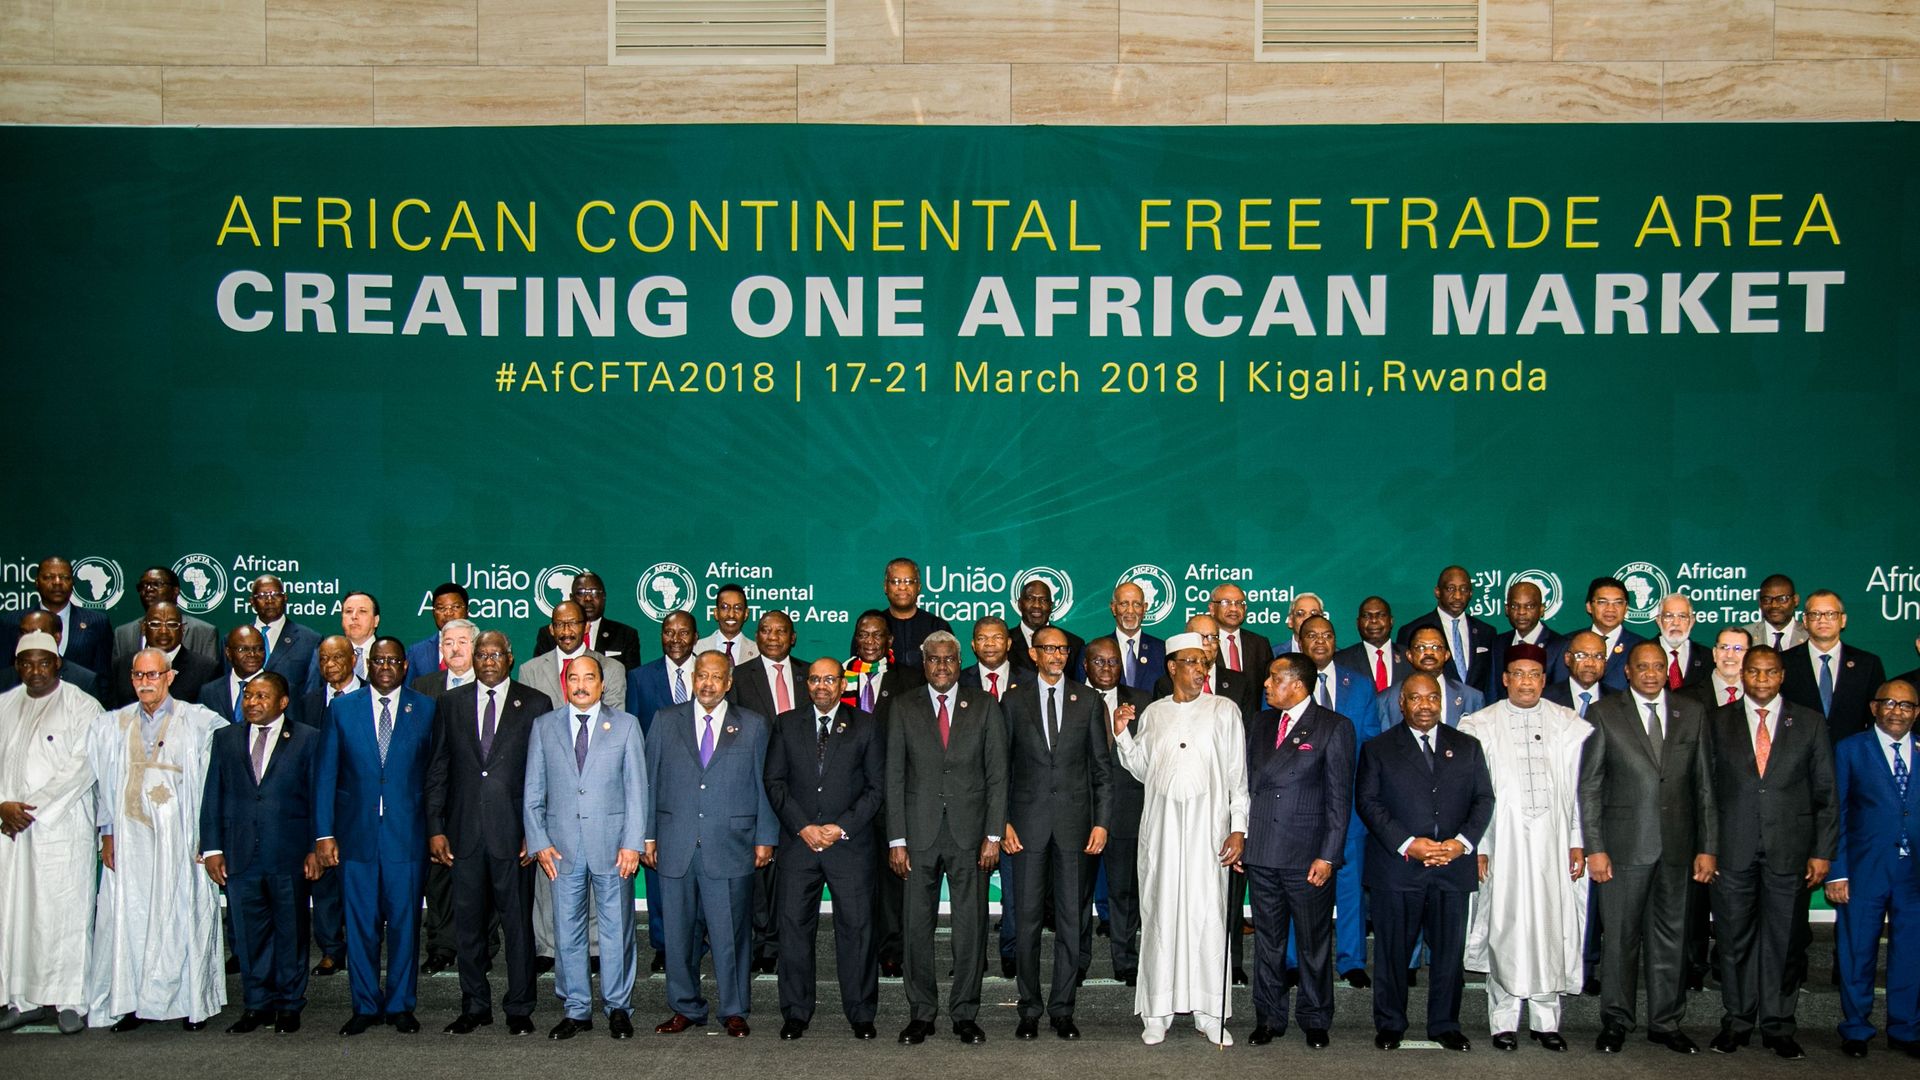 The African Heads of States and Governments pose during African Union (AU) Summit for the agreement to establish the African Continental Free Trade Area in Kigali, Rwanda, on March 21, 2018.